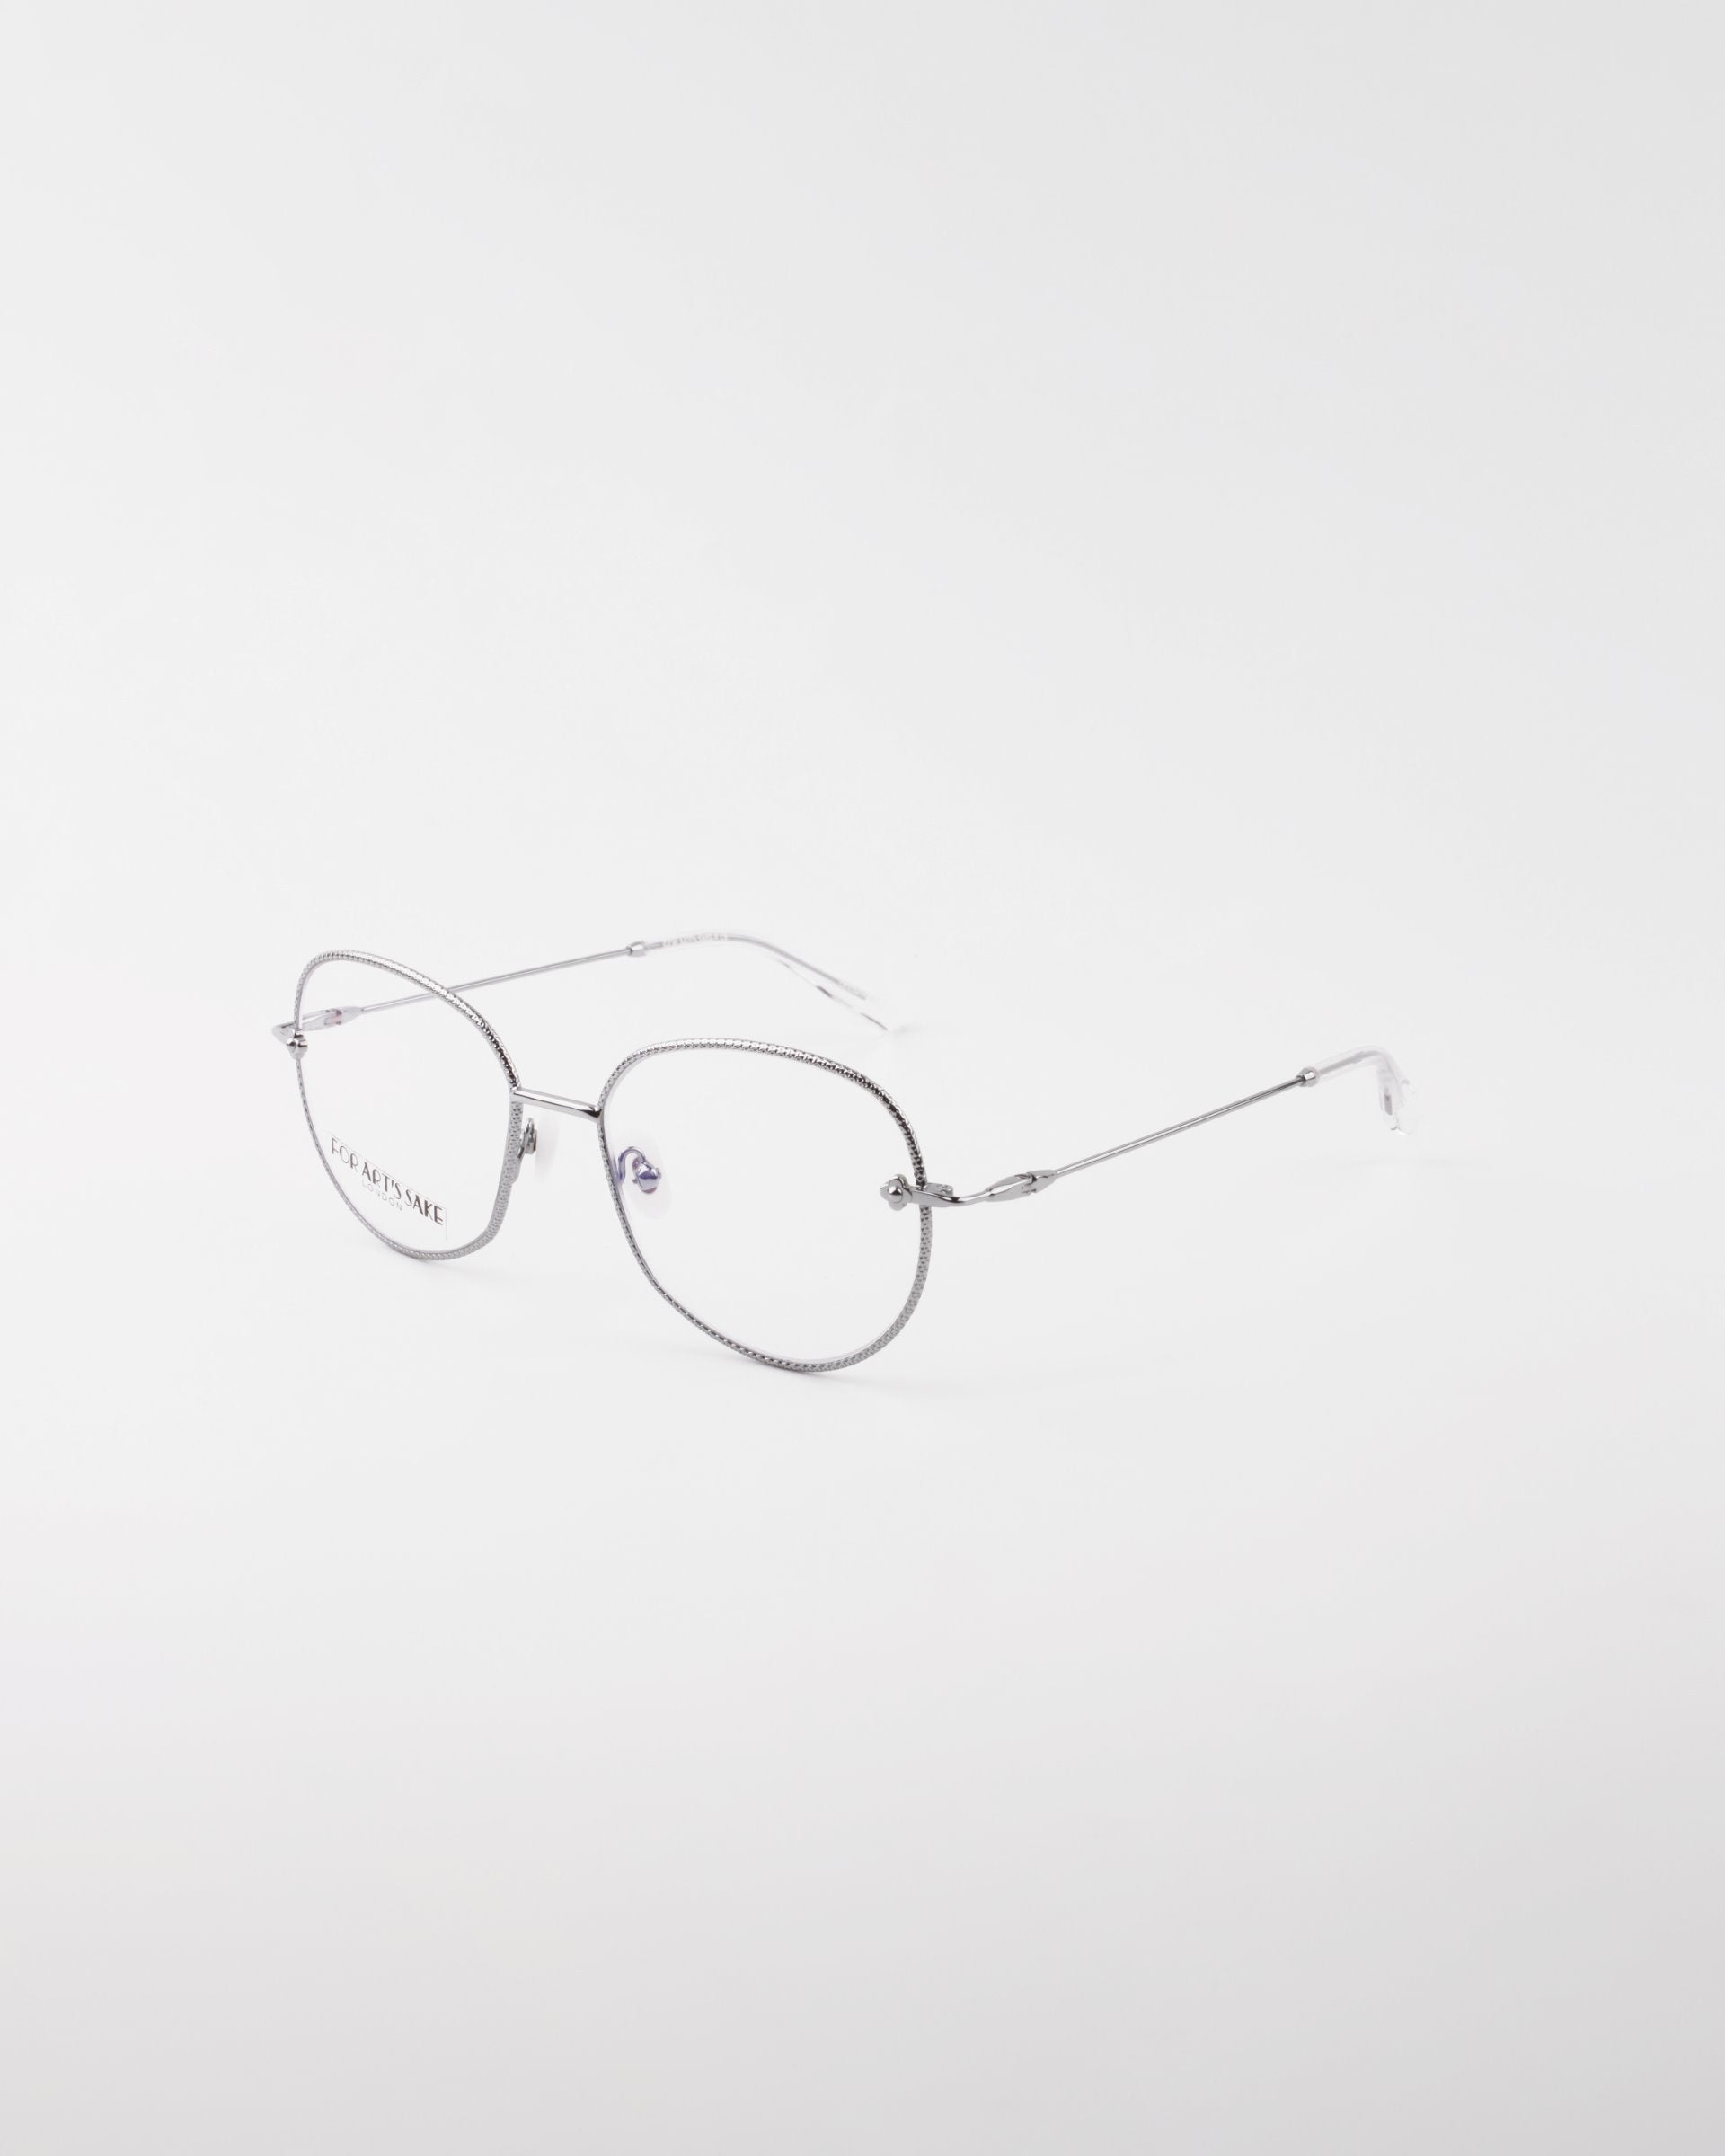 A pair of thin metal-framed eyeglasses with round lenses. The frames are gold-plated stainless steel, and the glasses are positioned at an angle against a plain white background. The minimalistic design gives this piece of handmade For Art&#39;s Sake® Jasmine eyewear an elegant and sleek appearance.